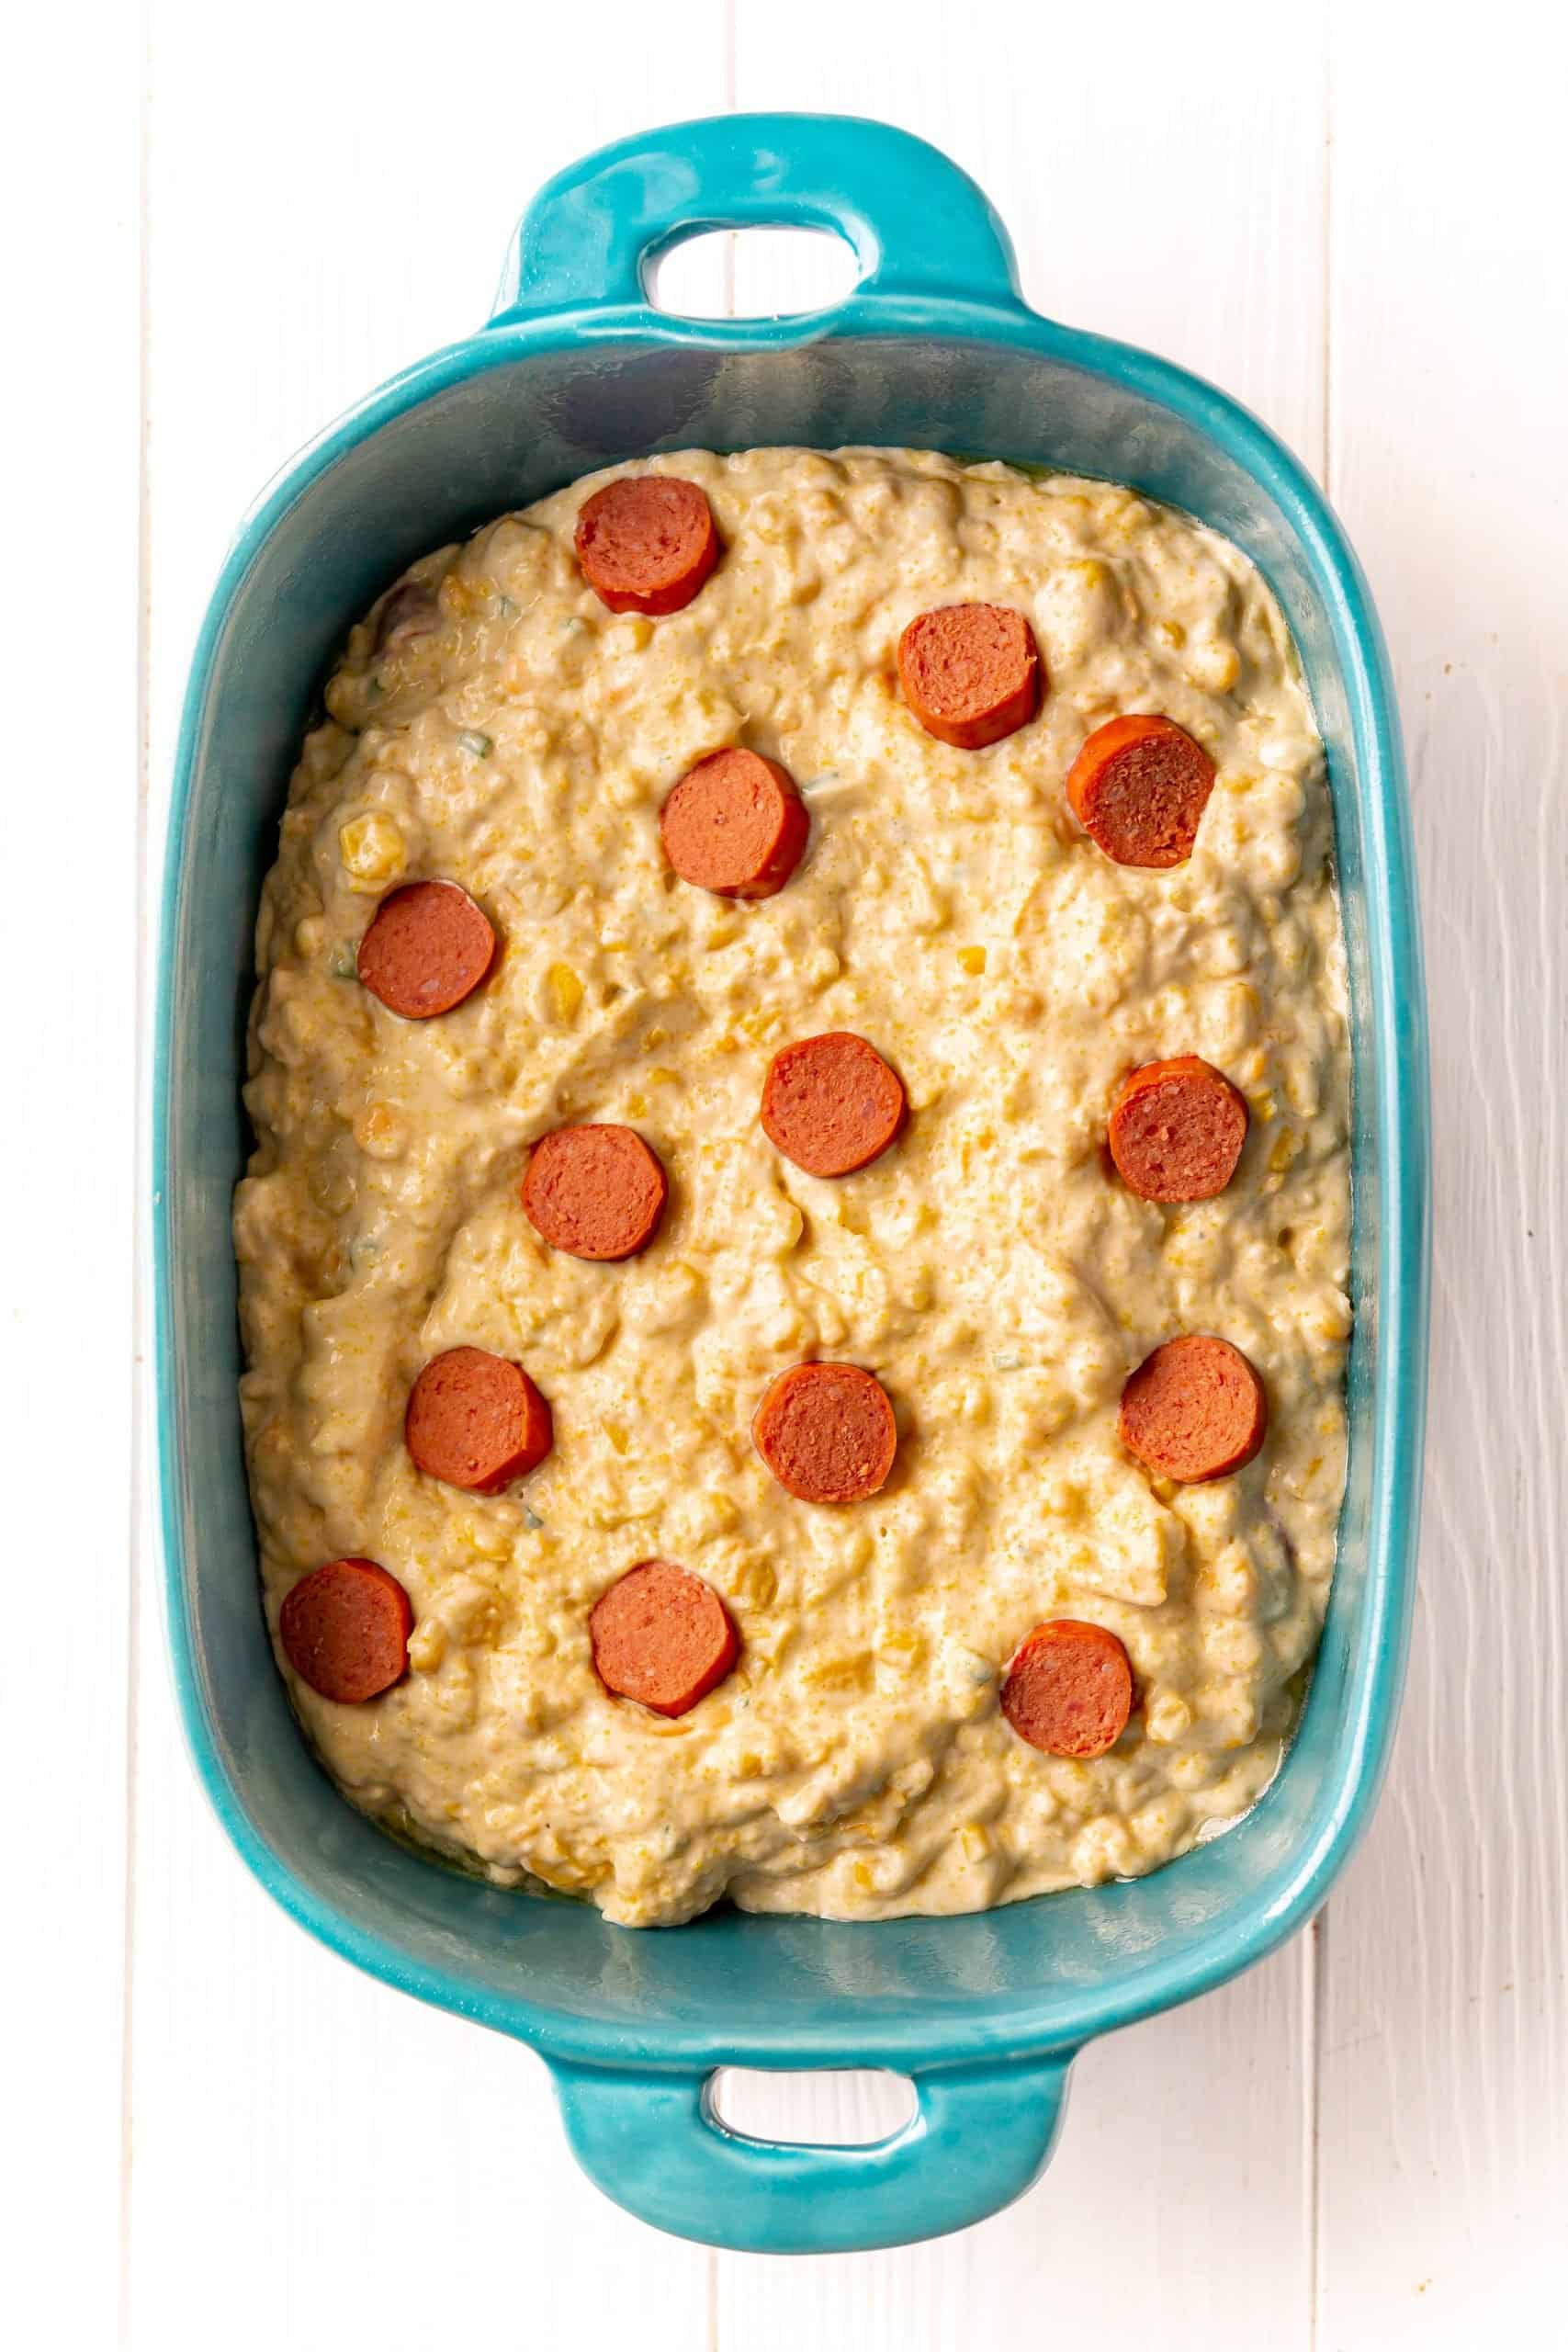 sliced hotdogs placed evenly around the top of the corn casserole batter in a blue baking dish.